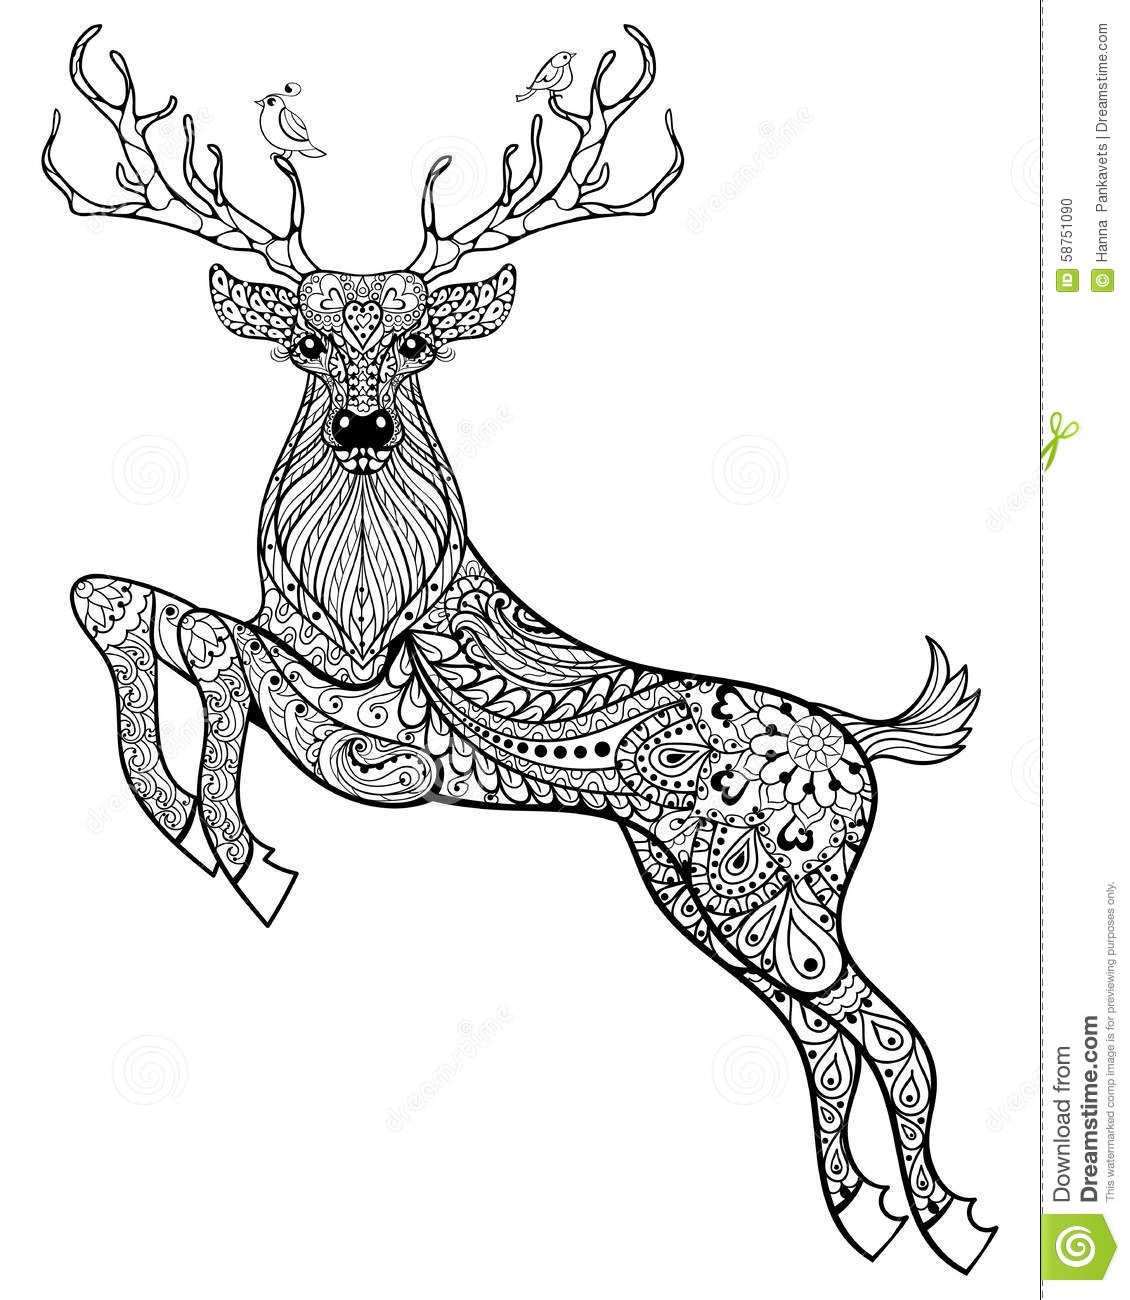 Deer Coloring Pages For Adults
 Hand Drawn Magic Horned Deer With Birds For Adult Anti